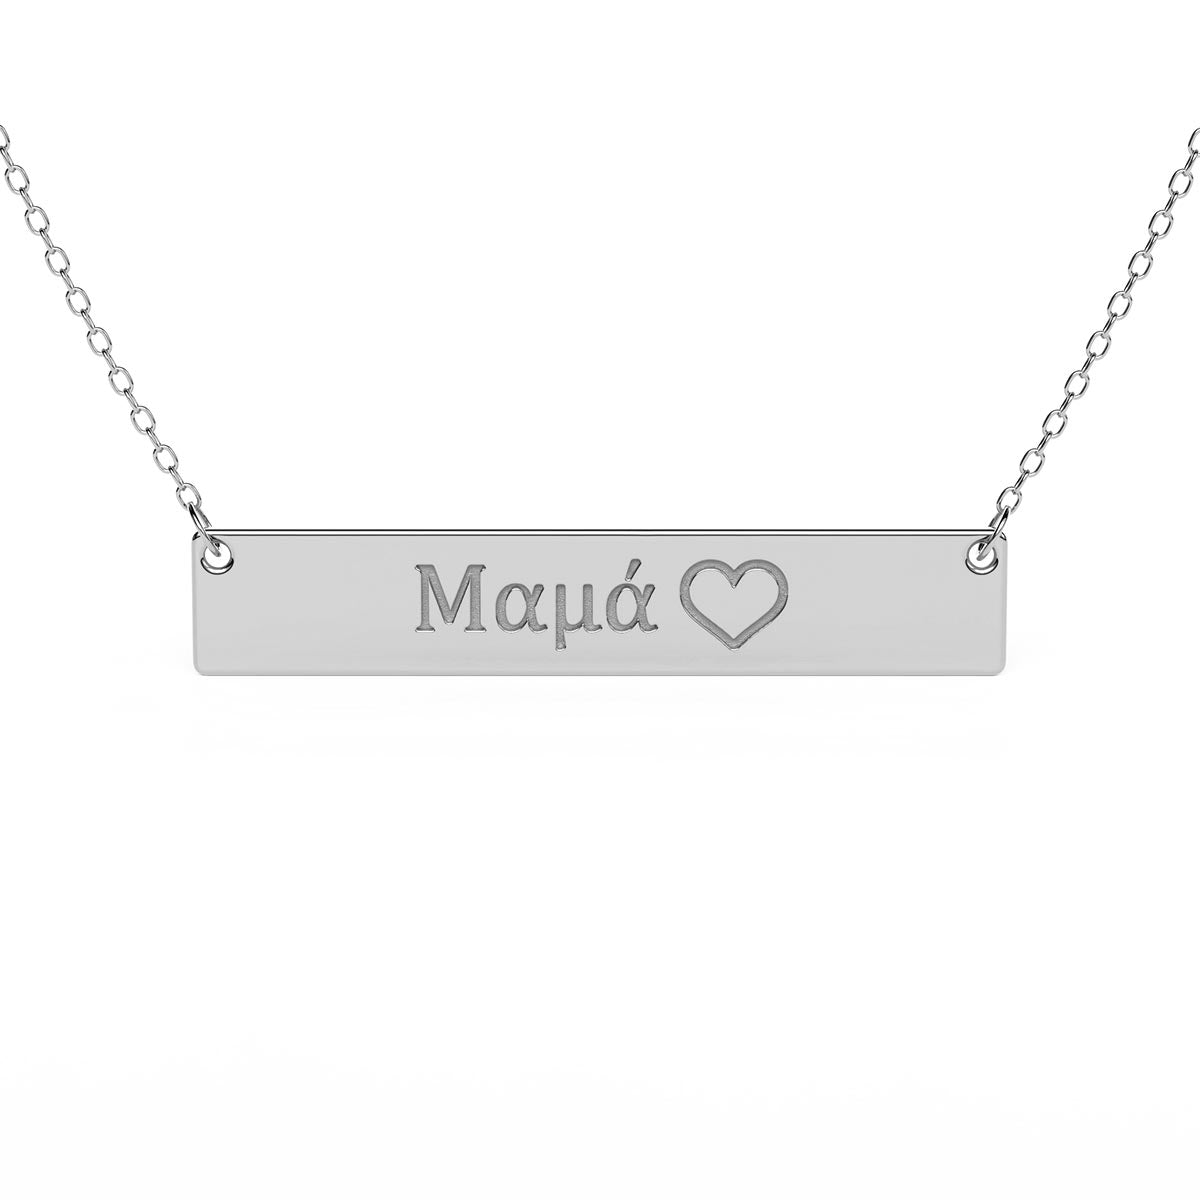 Bar Necklace With Greek Mom (Μαμά) Engraving